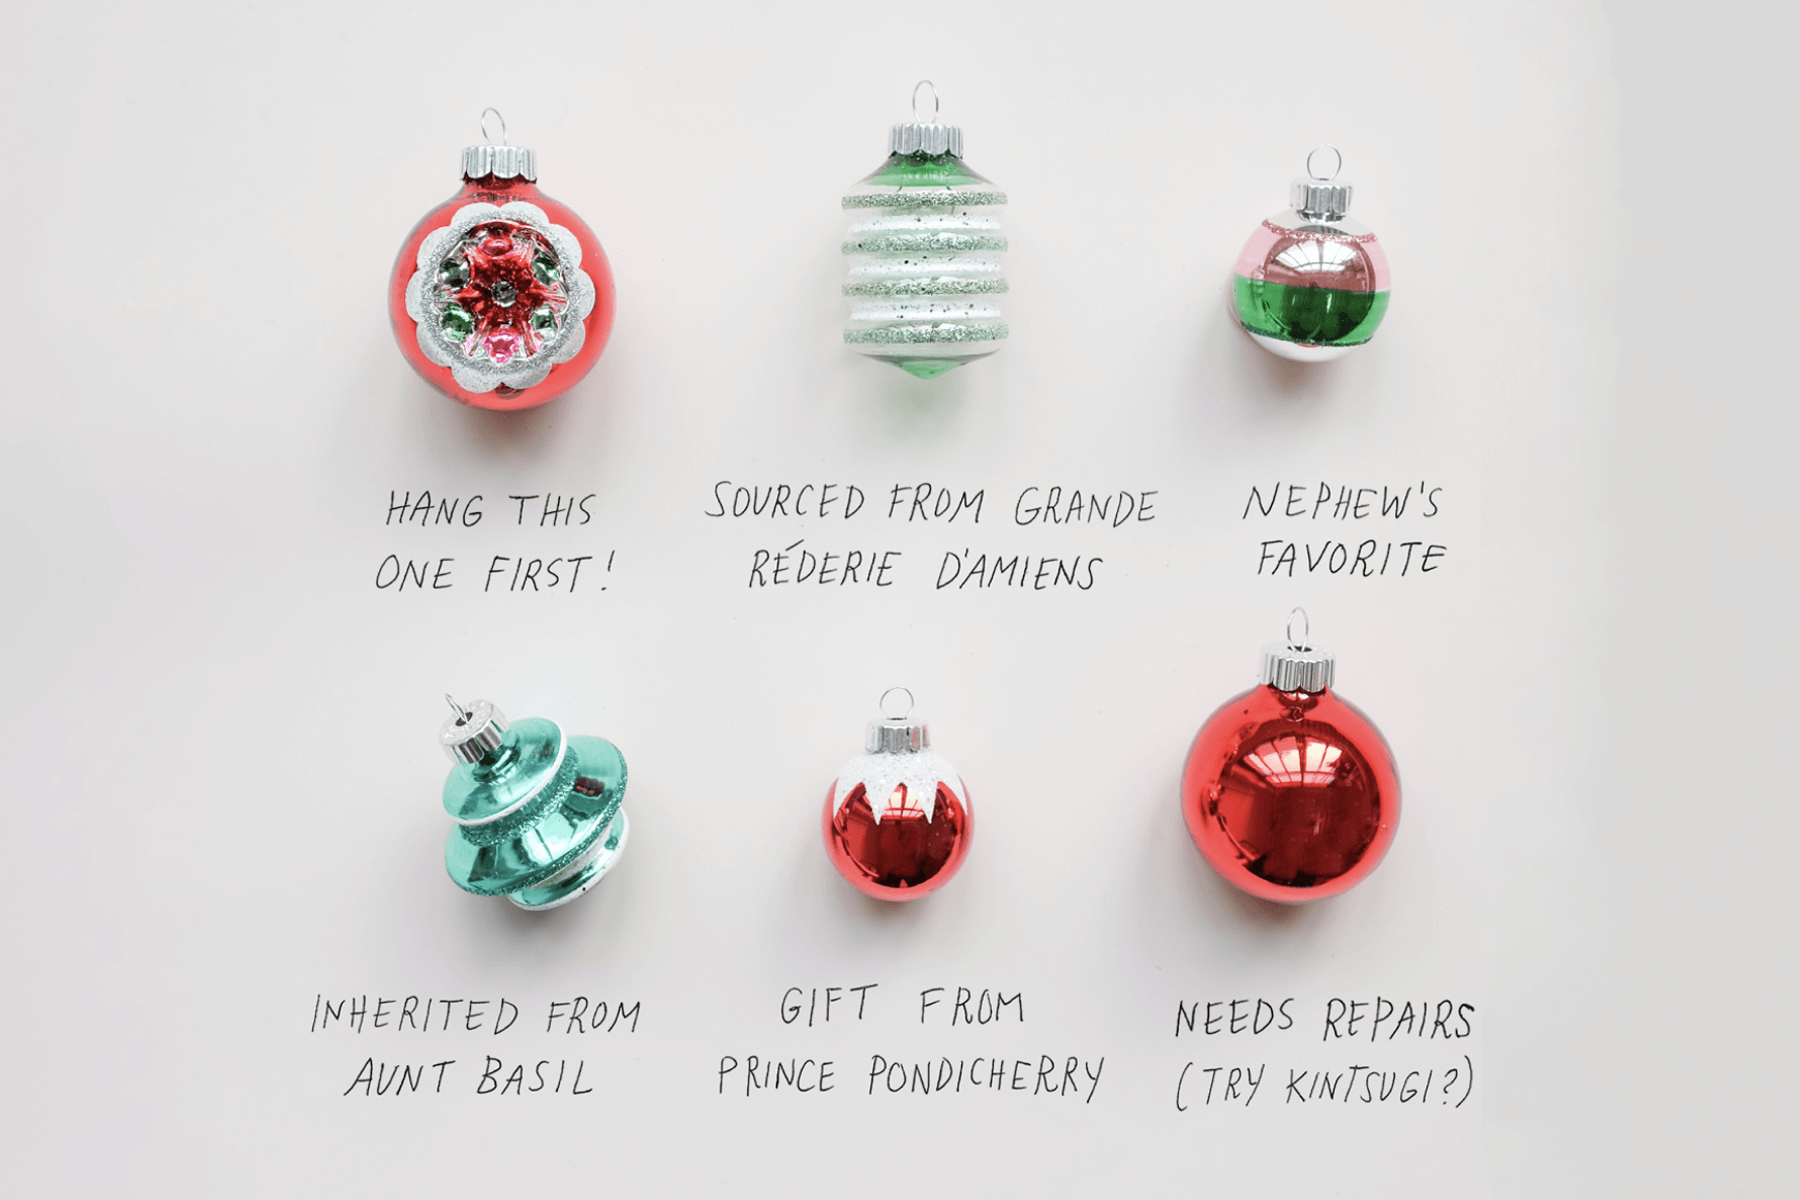 A flat lay photo of six red and green Christmas tree bulb ornaments with hand-written notes below each one about their origin and hanging instructions.